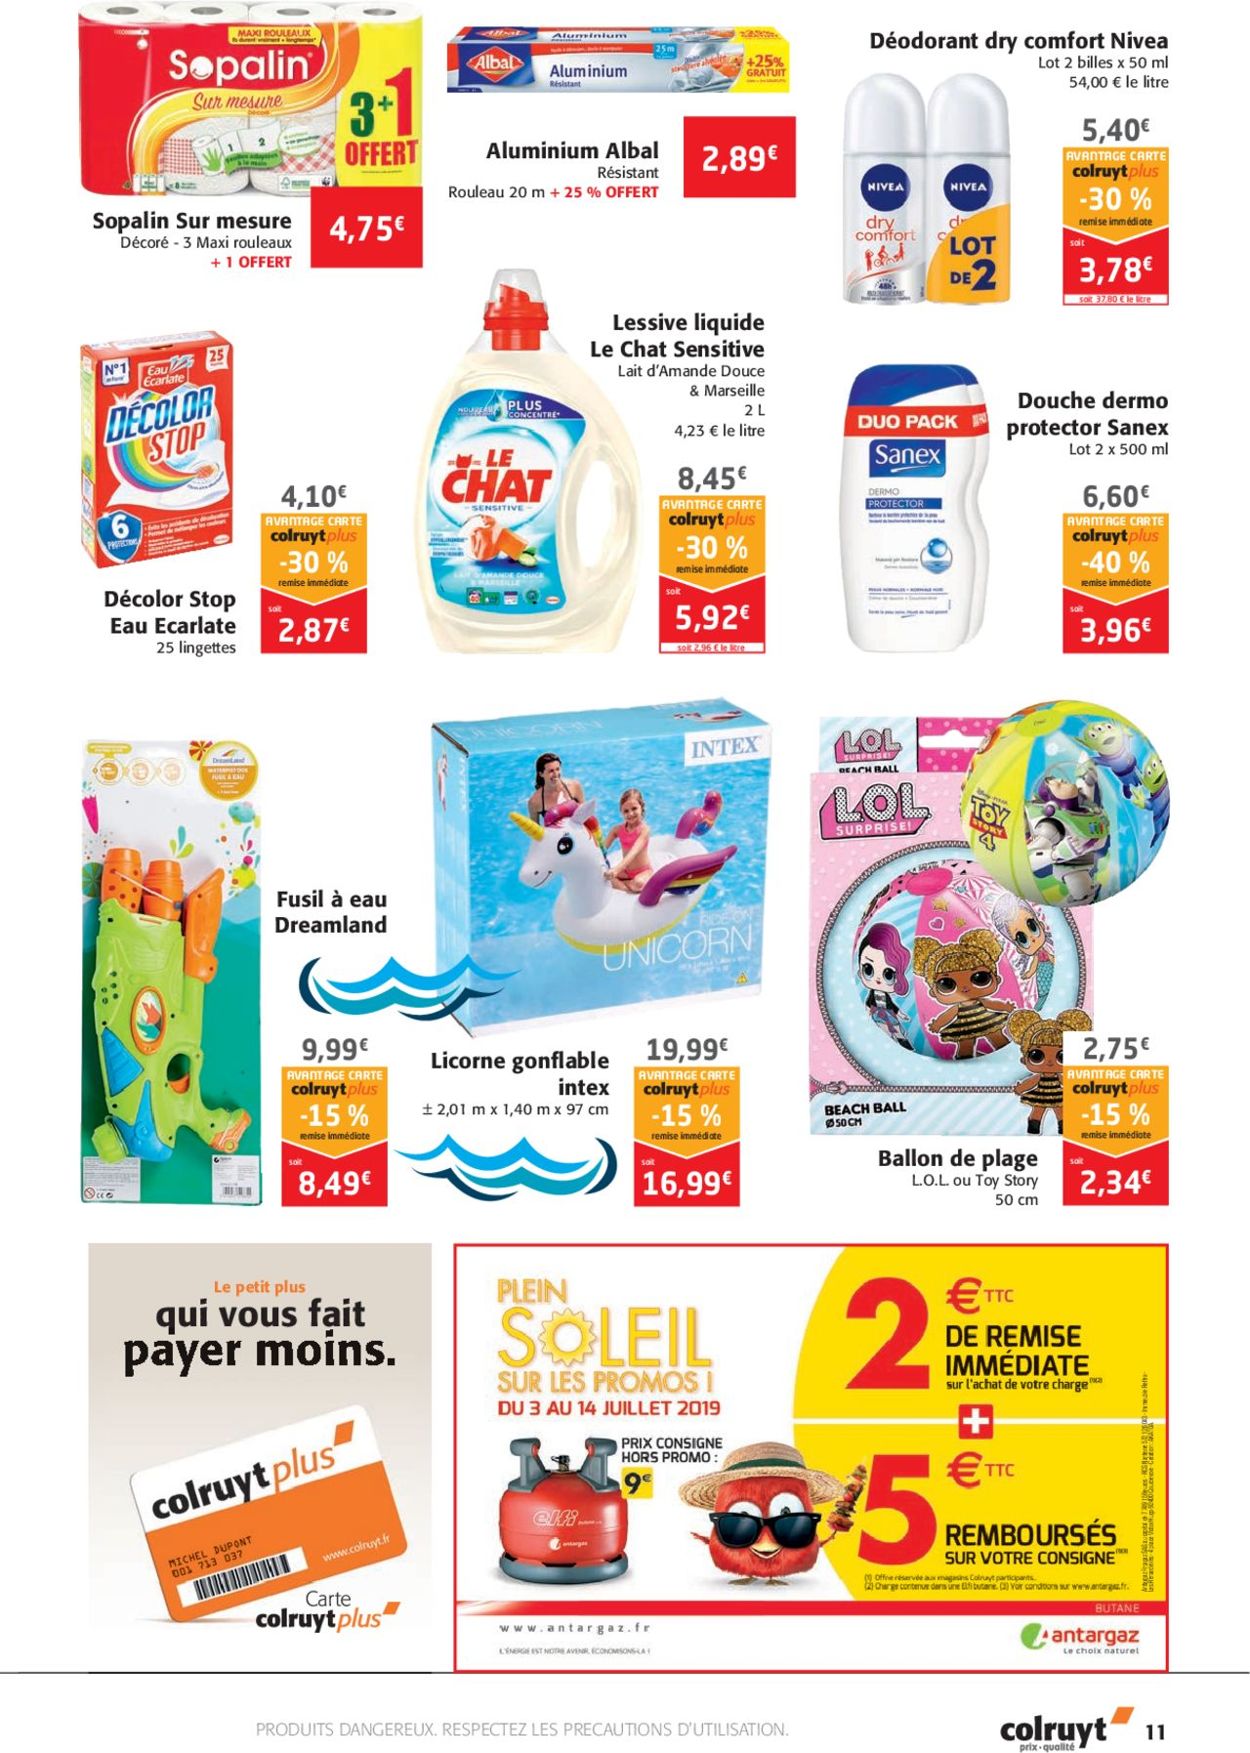 Colruyt Catalogue - 03.07-14.07.2019 (Page 11)